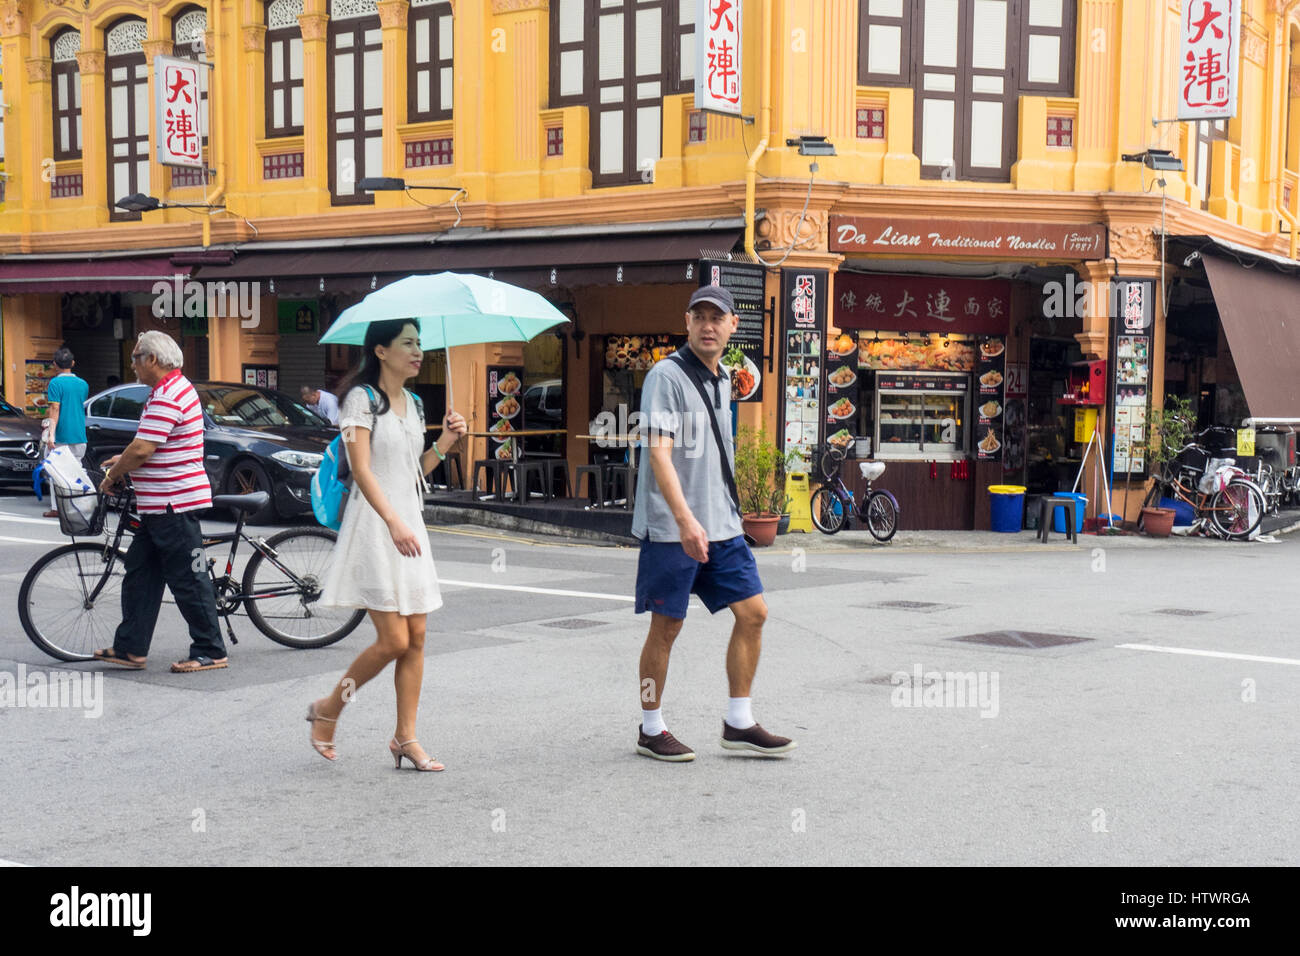 Pedestrian and cycling traffic on a street in suburban Singapore. Stock Photo